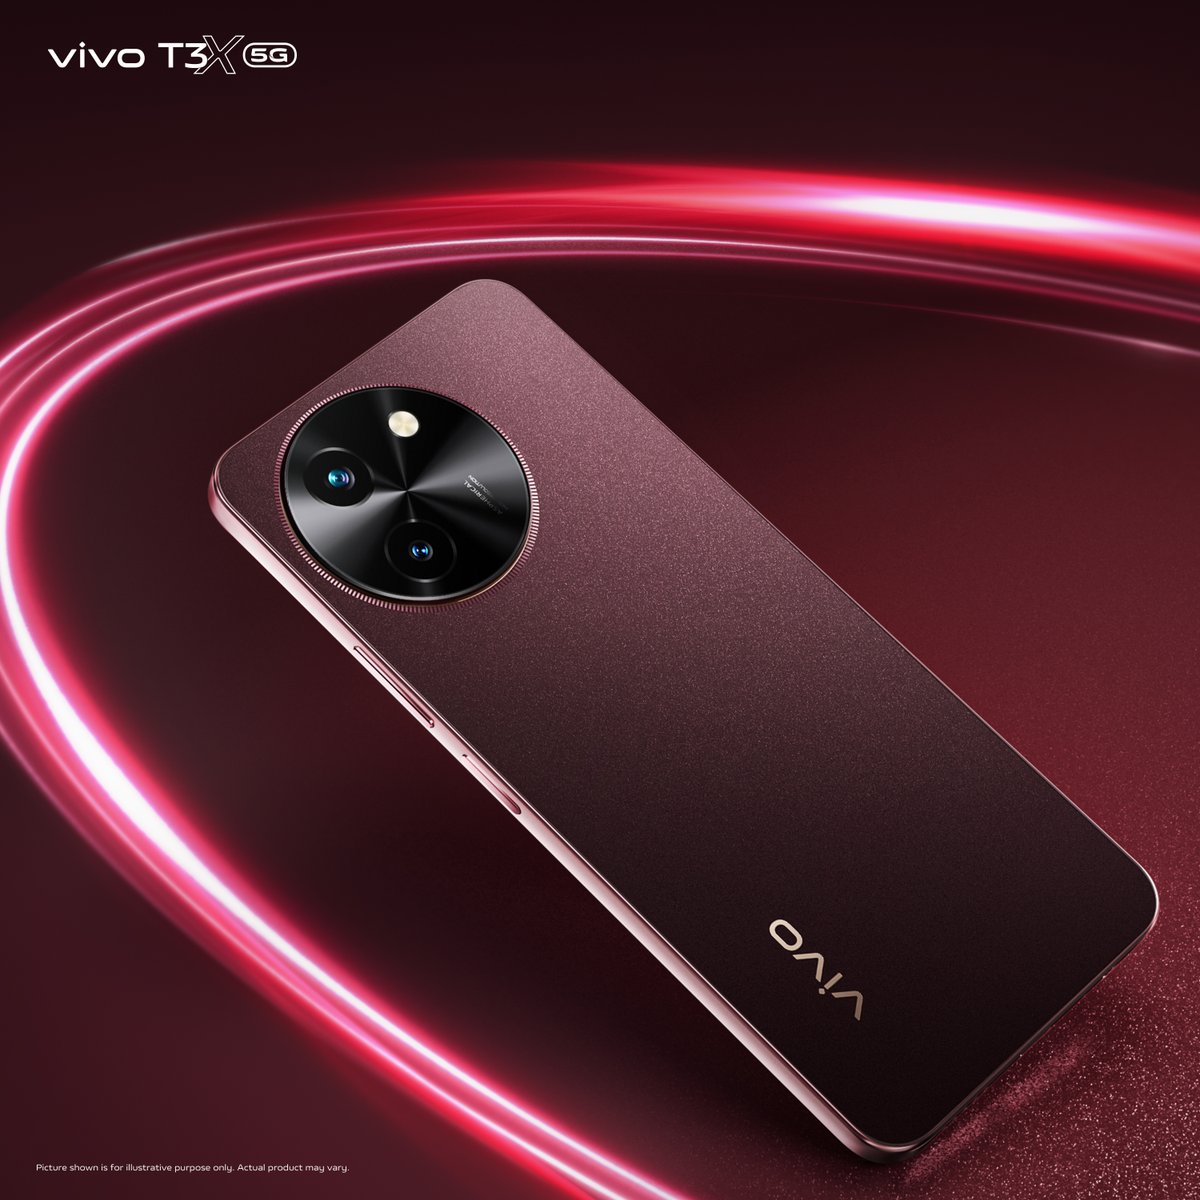 The all-new #vivoT3X 5G is here, available now in vibrant Crimson Bliss color! Get ready to be a multitasking pro and #GetSetTurbo! Sale starts on April 24th. Stay tuned!

Know more bit.ly/3U3id0C